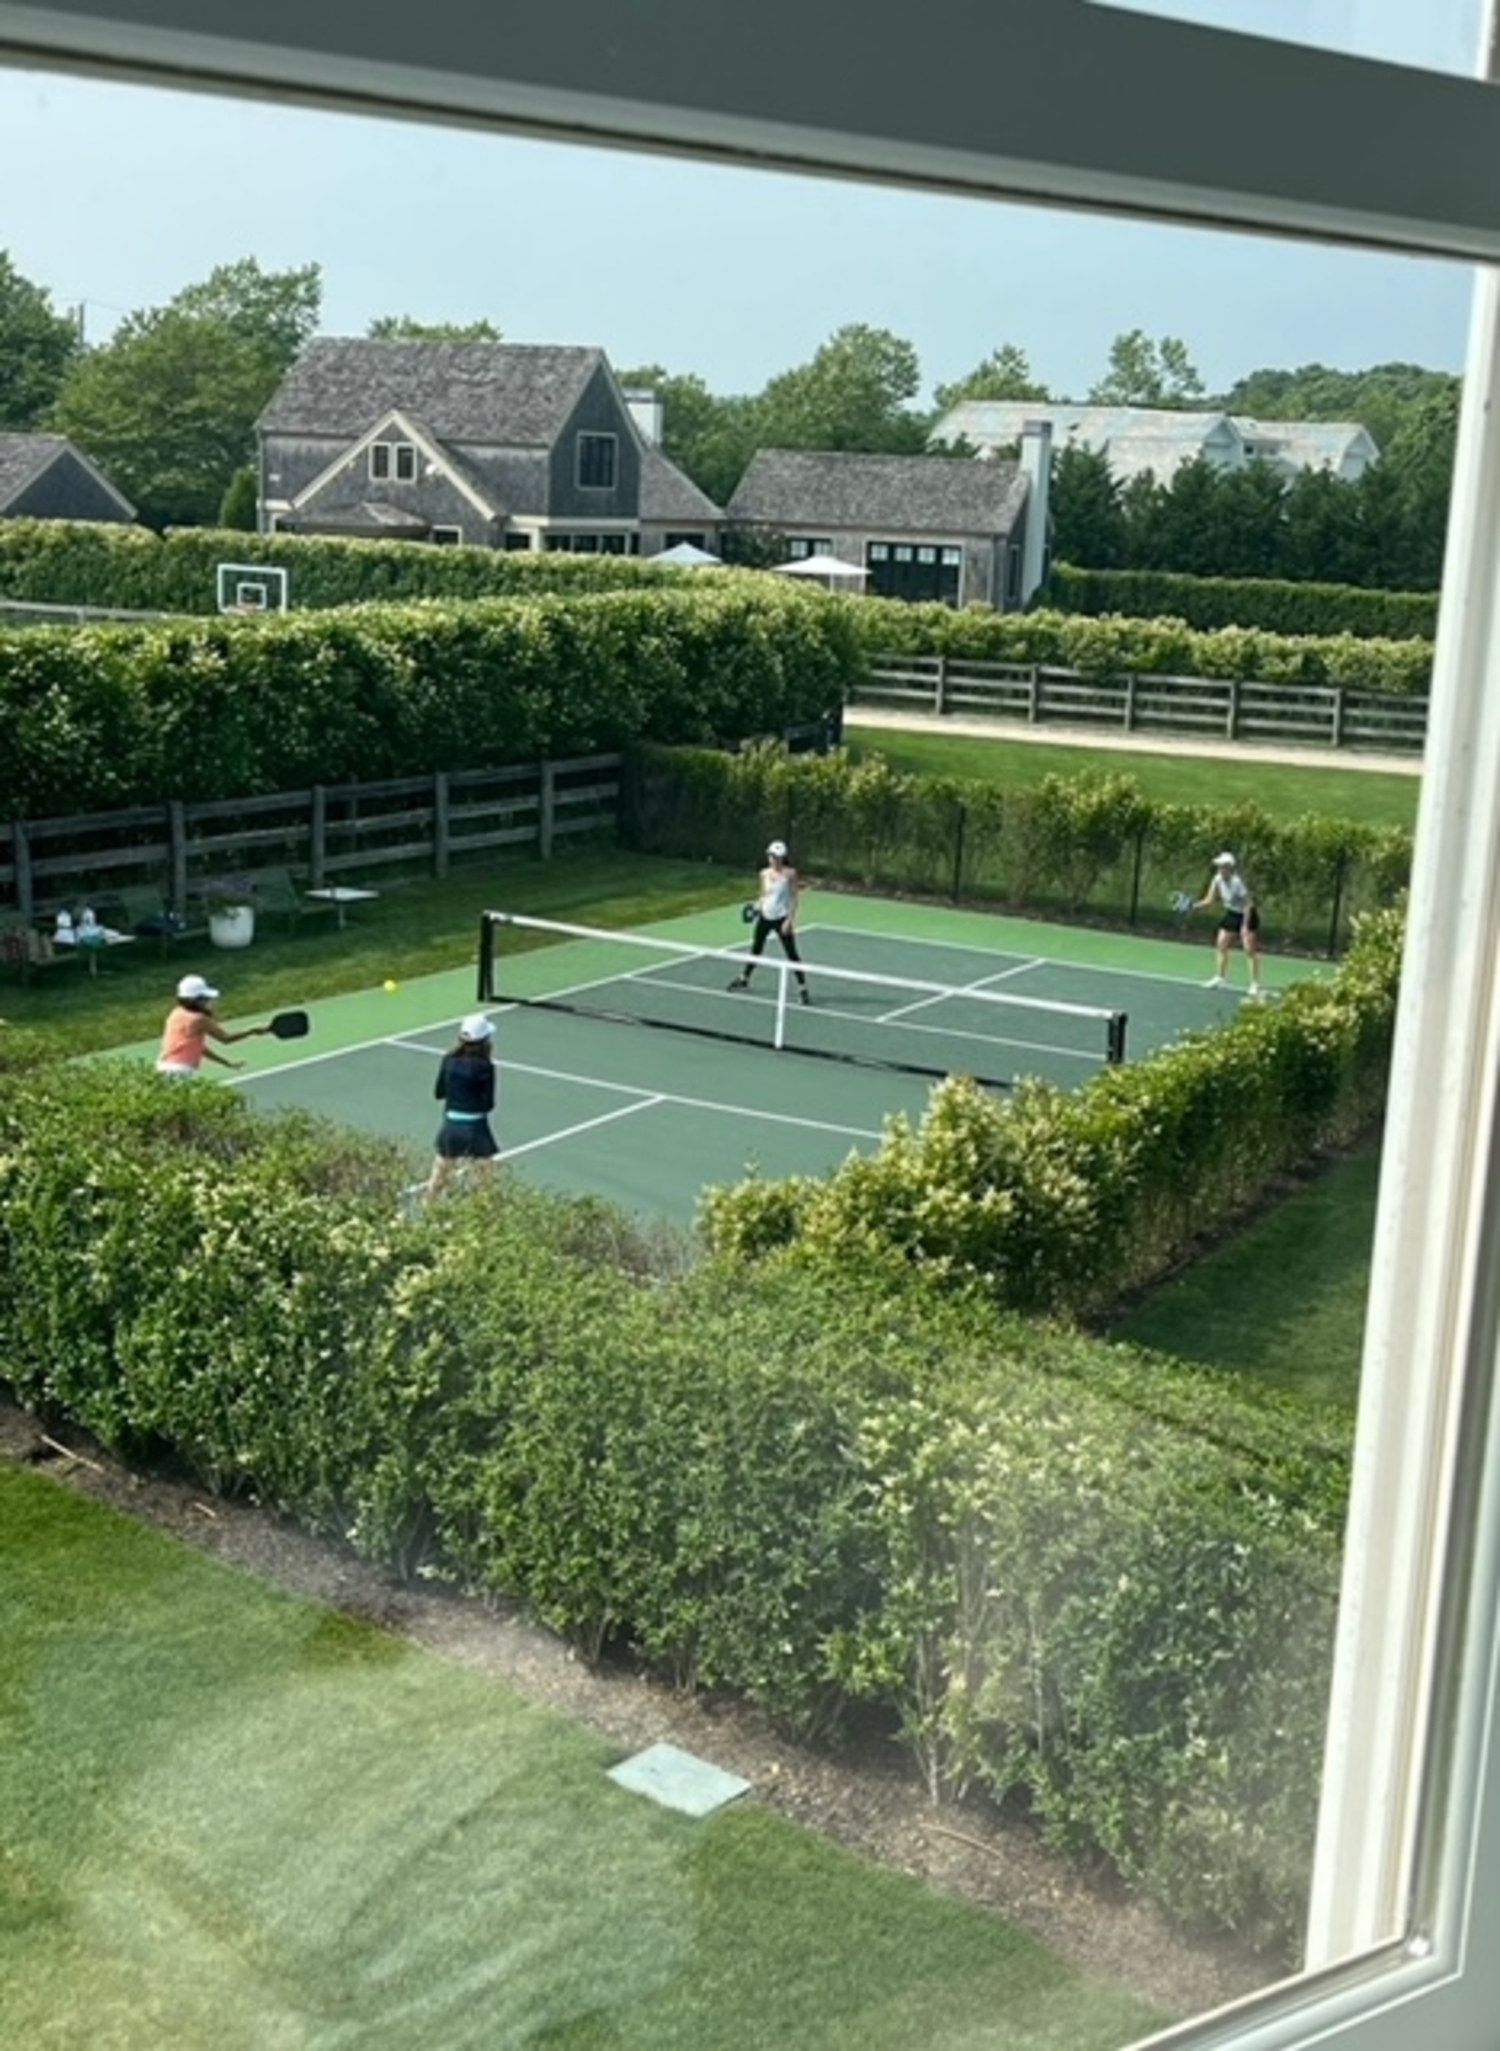 Many people have put shrubs around their private pickleball courts to try and help reduce noise produced by the game.